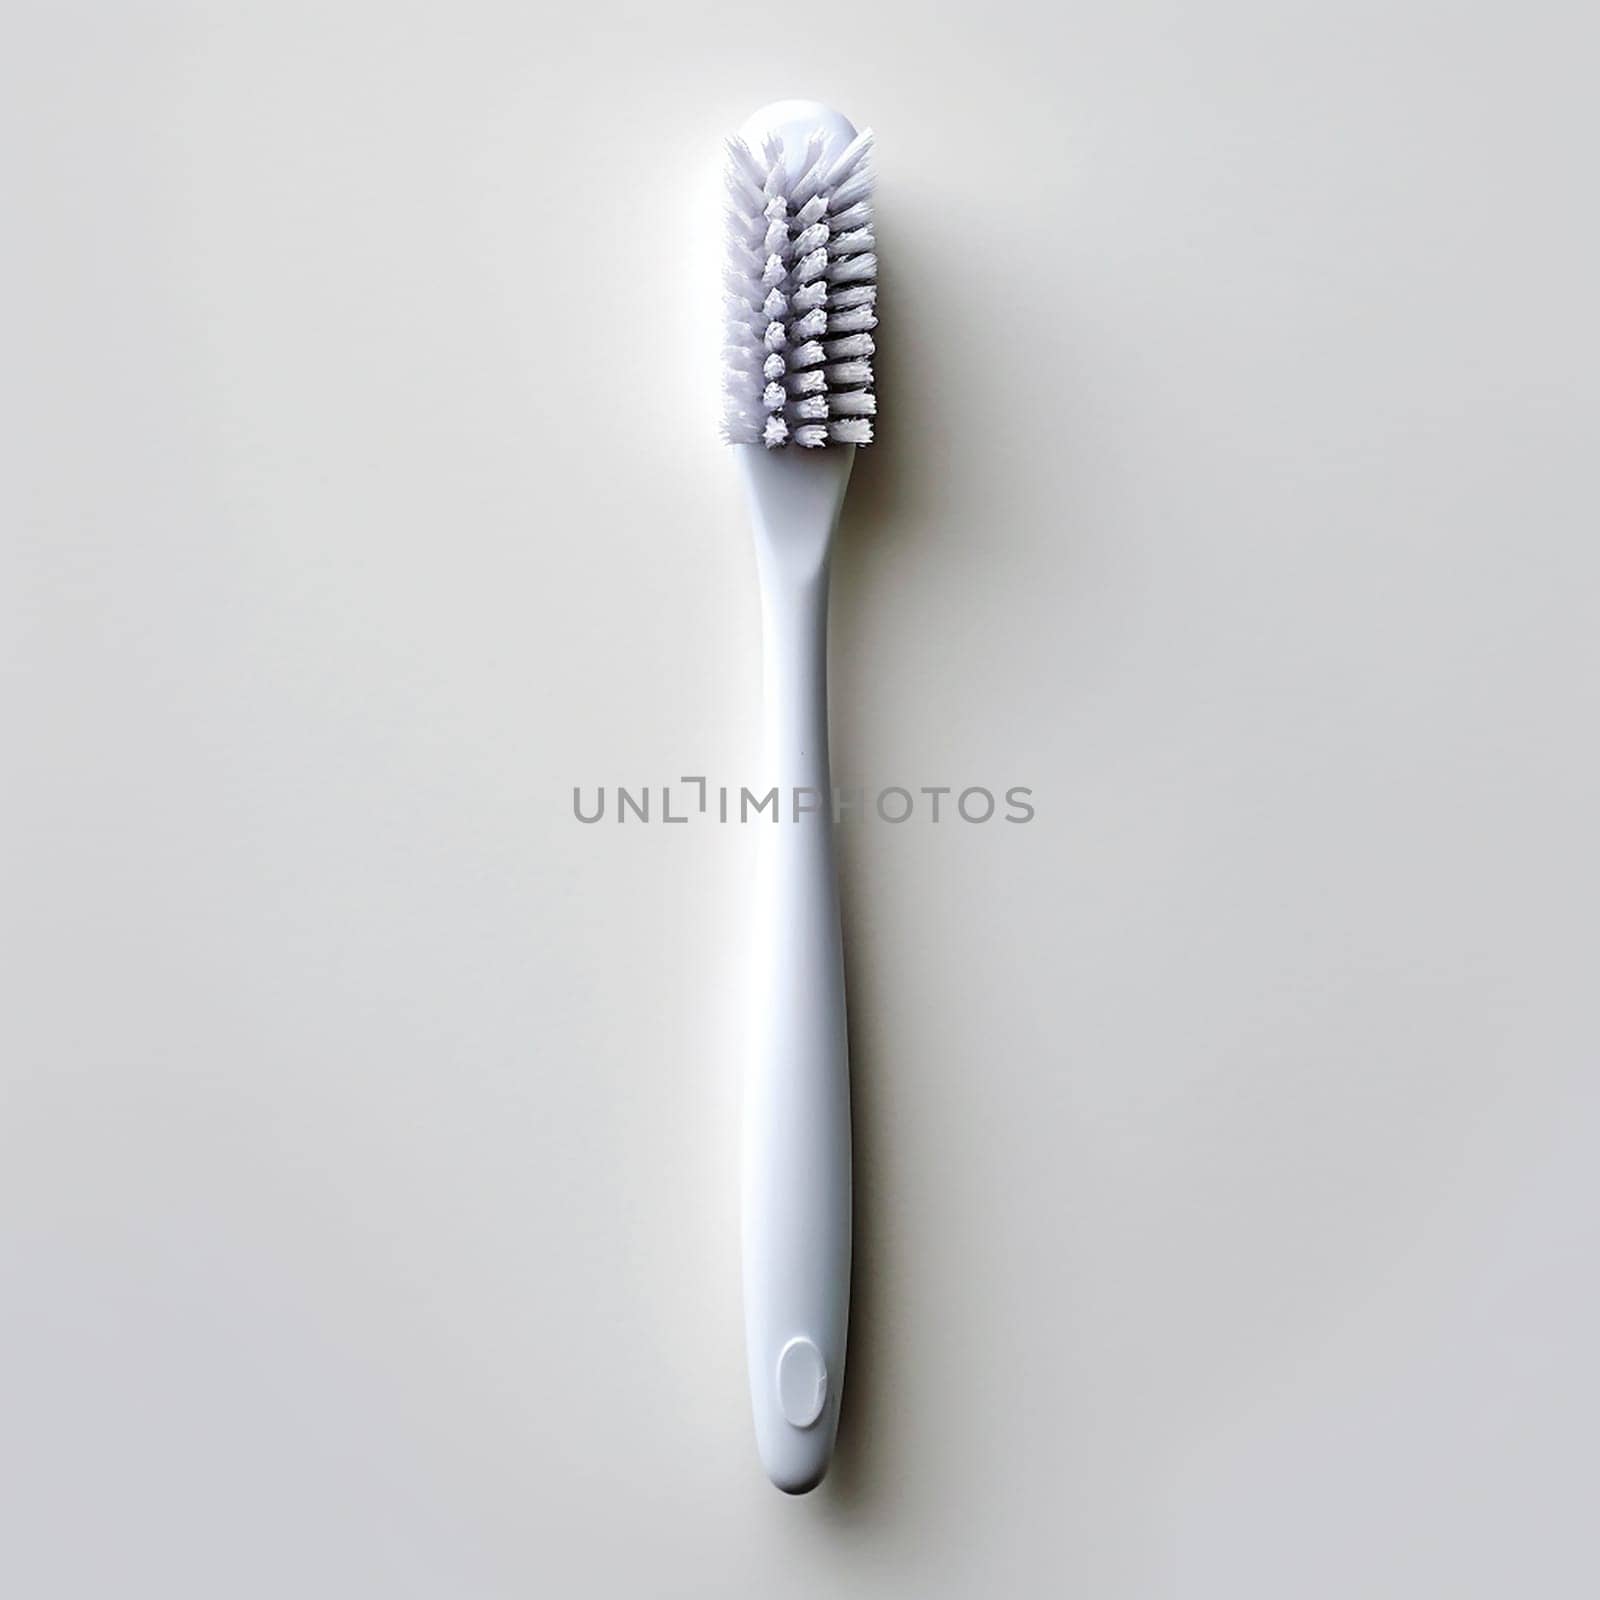 A single white toothbrush against a plain background. by Hype2art